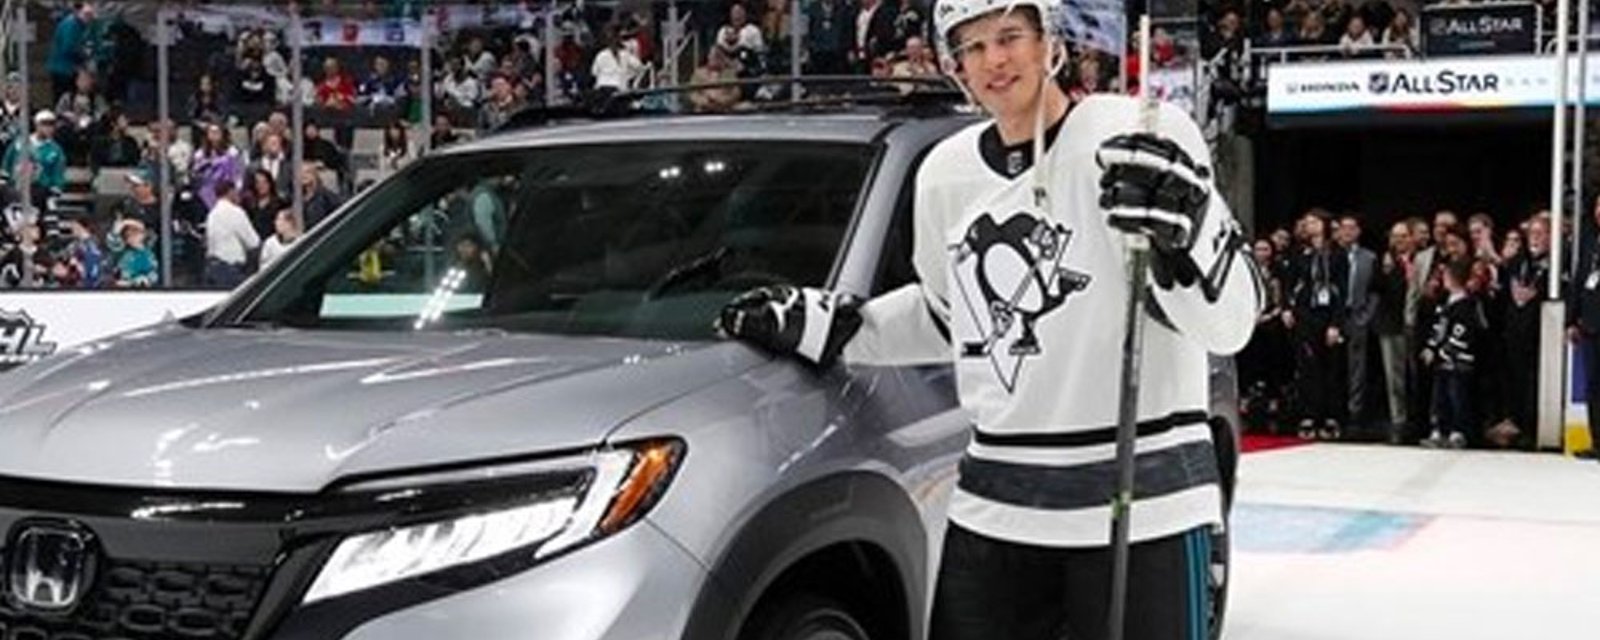 After winning a car at last year’s ASG, Crosby gave it to a veteran! 